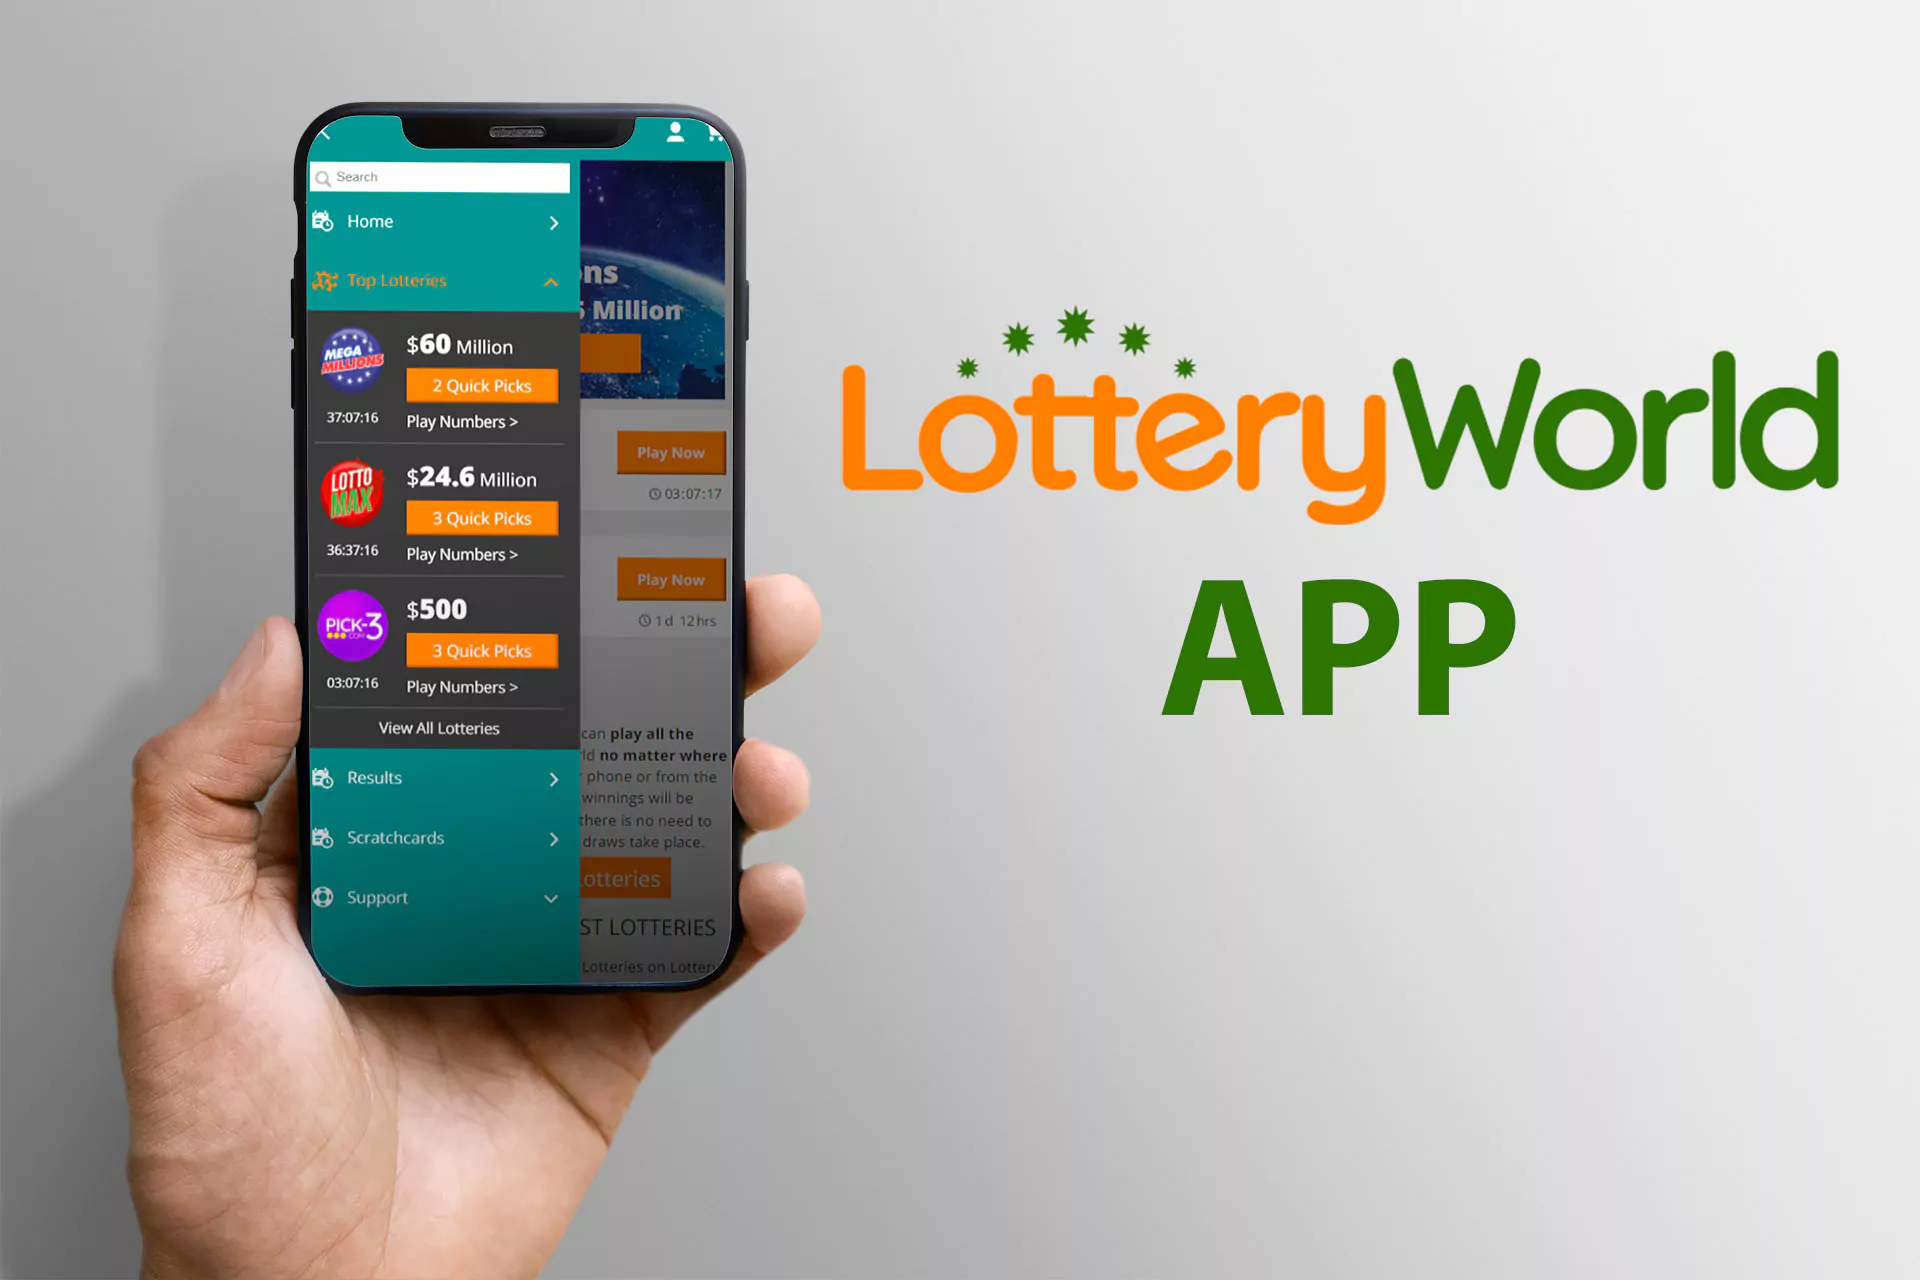 Test this new app for paying lotteries.